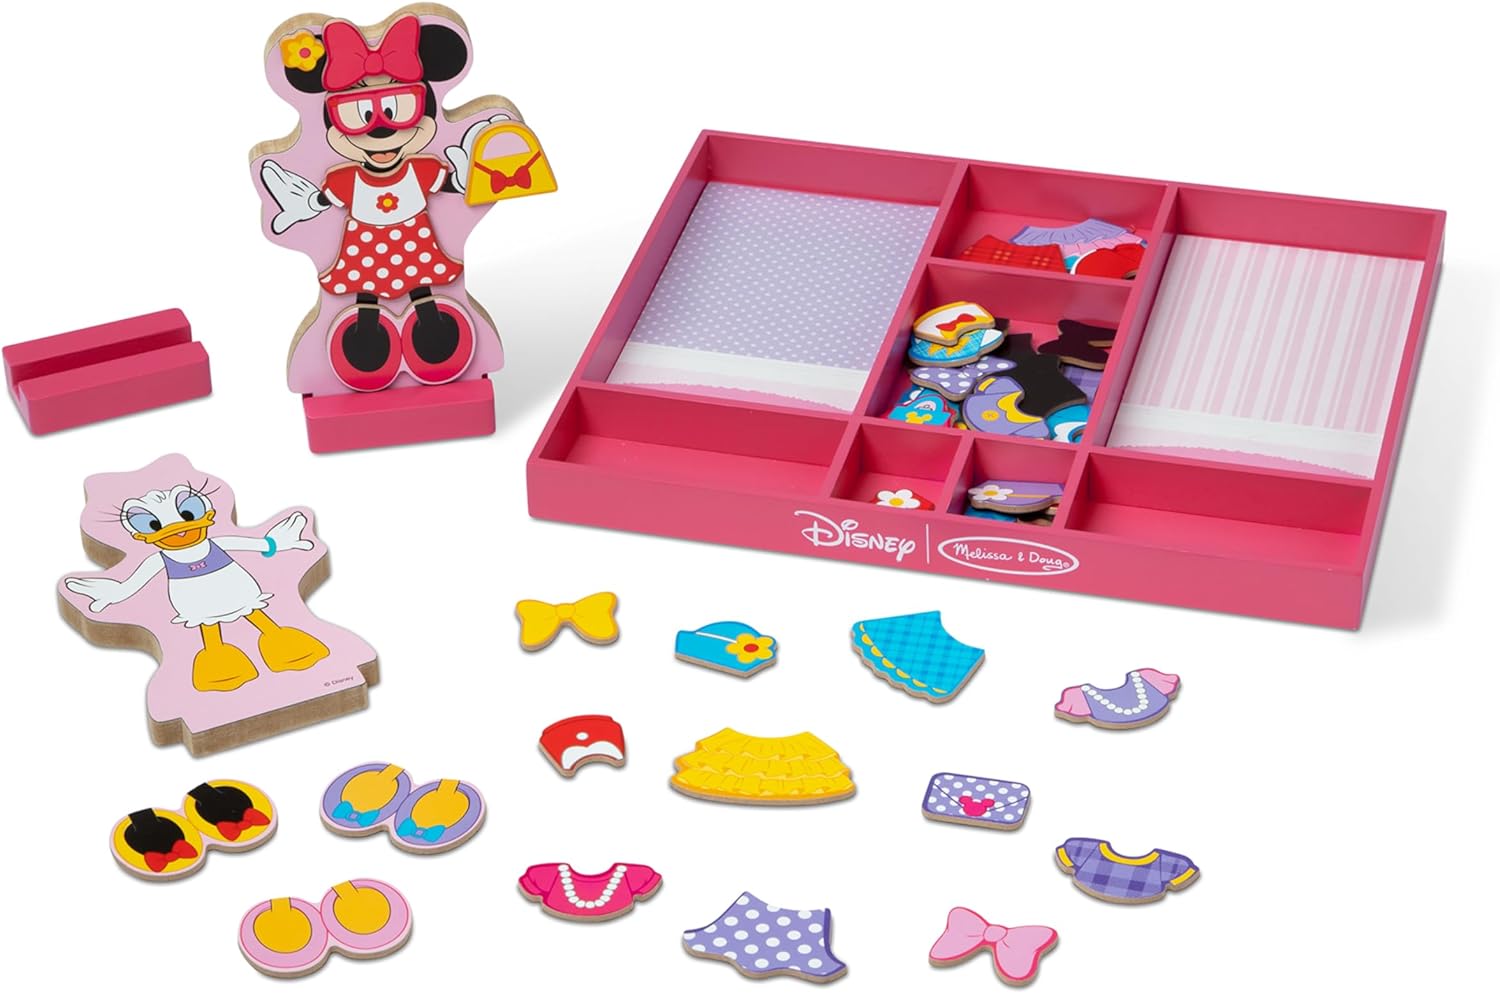 Melissa & Doug Disney Minnie Mouse and Daisy Duck Magnetic Dress-Up Wooden Doll Pretend Play Set (40+ pcs) - Toys, Dress Up Dolls For Preschoolers And Kids Ages 3+